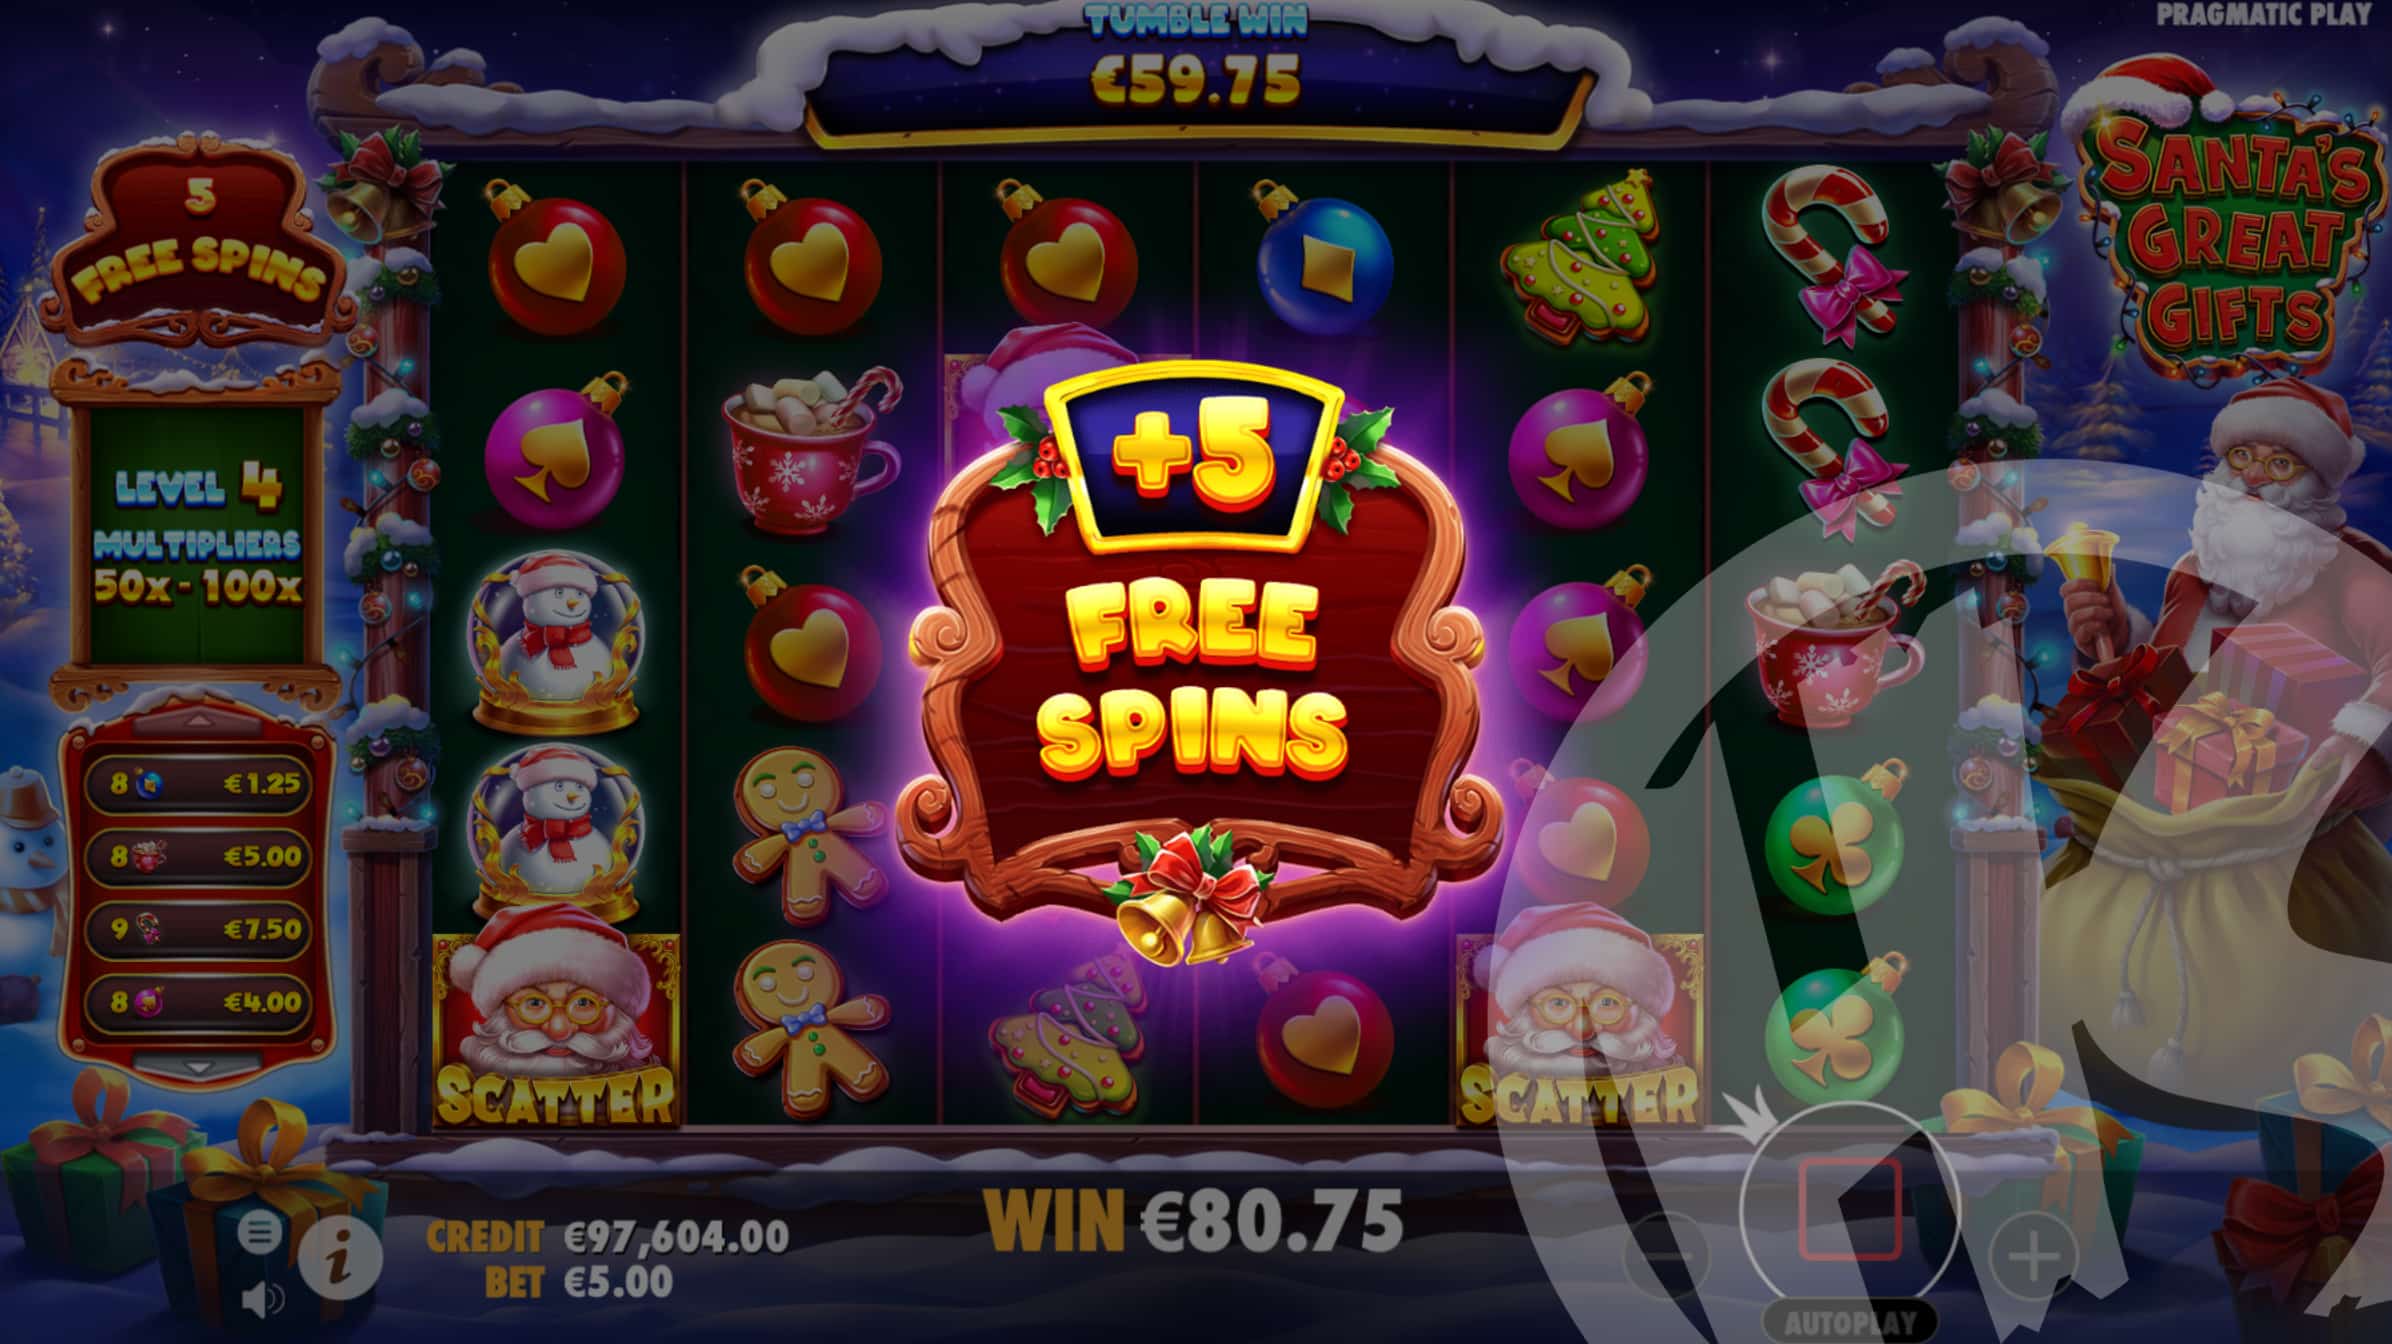 Land 3 or More Scatters During Free Spins to Trigger an Additional +5 Spins